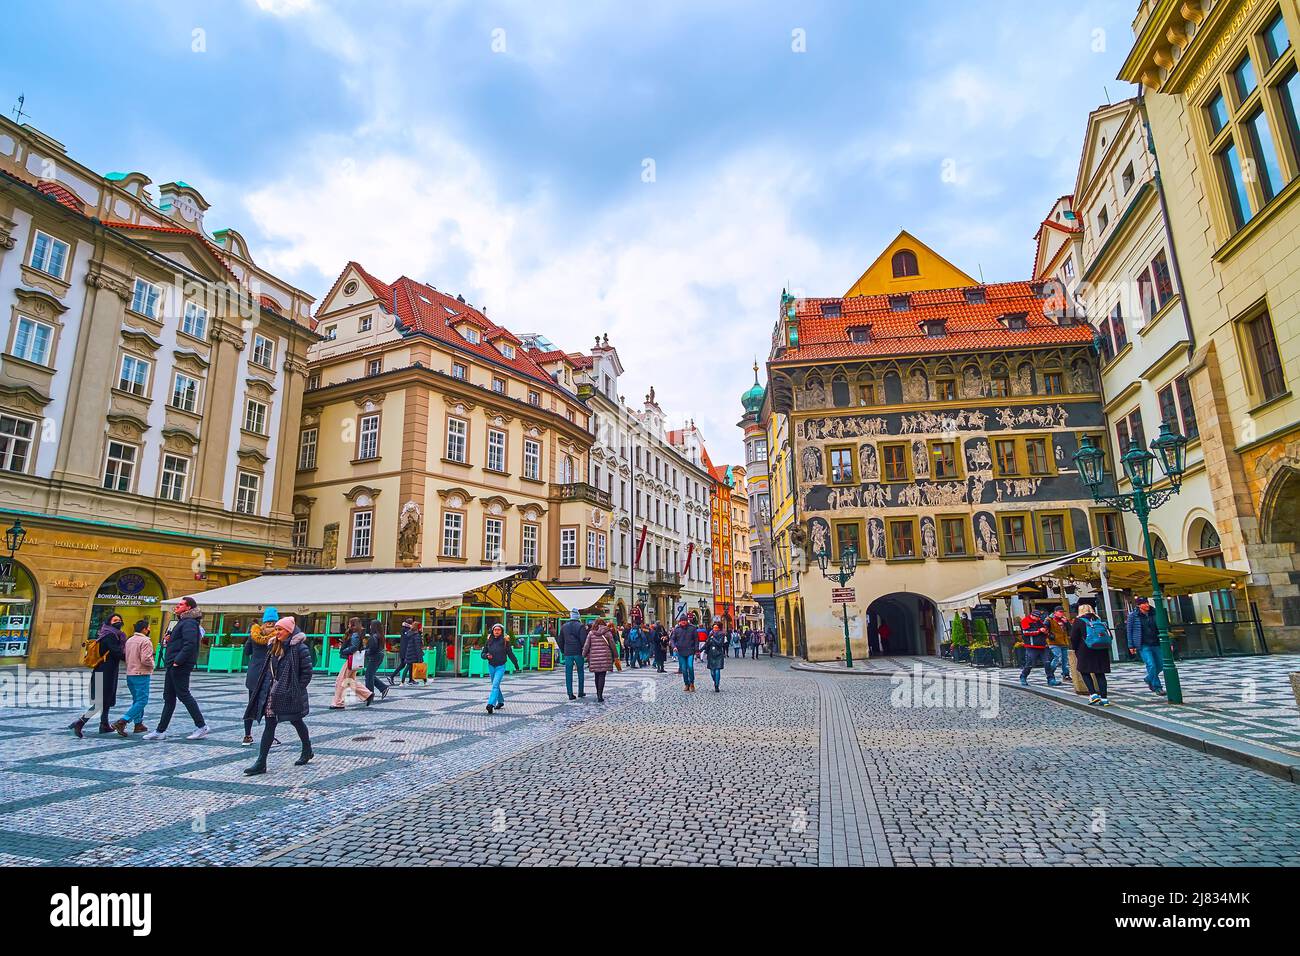 PRAGUE, CZECH REPUBLIC - MARCH 5, 2022: Walk the Old Town Square and enjoy its unique architecture, historic townhouses and sgraffito wall decoration Stock Photo